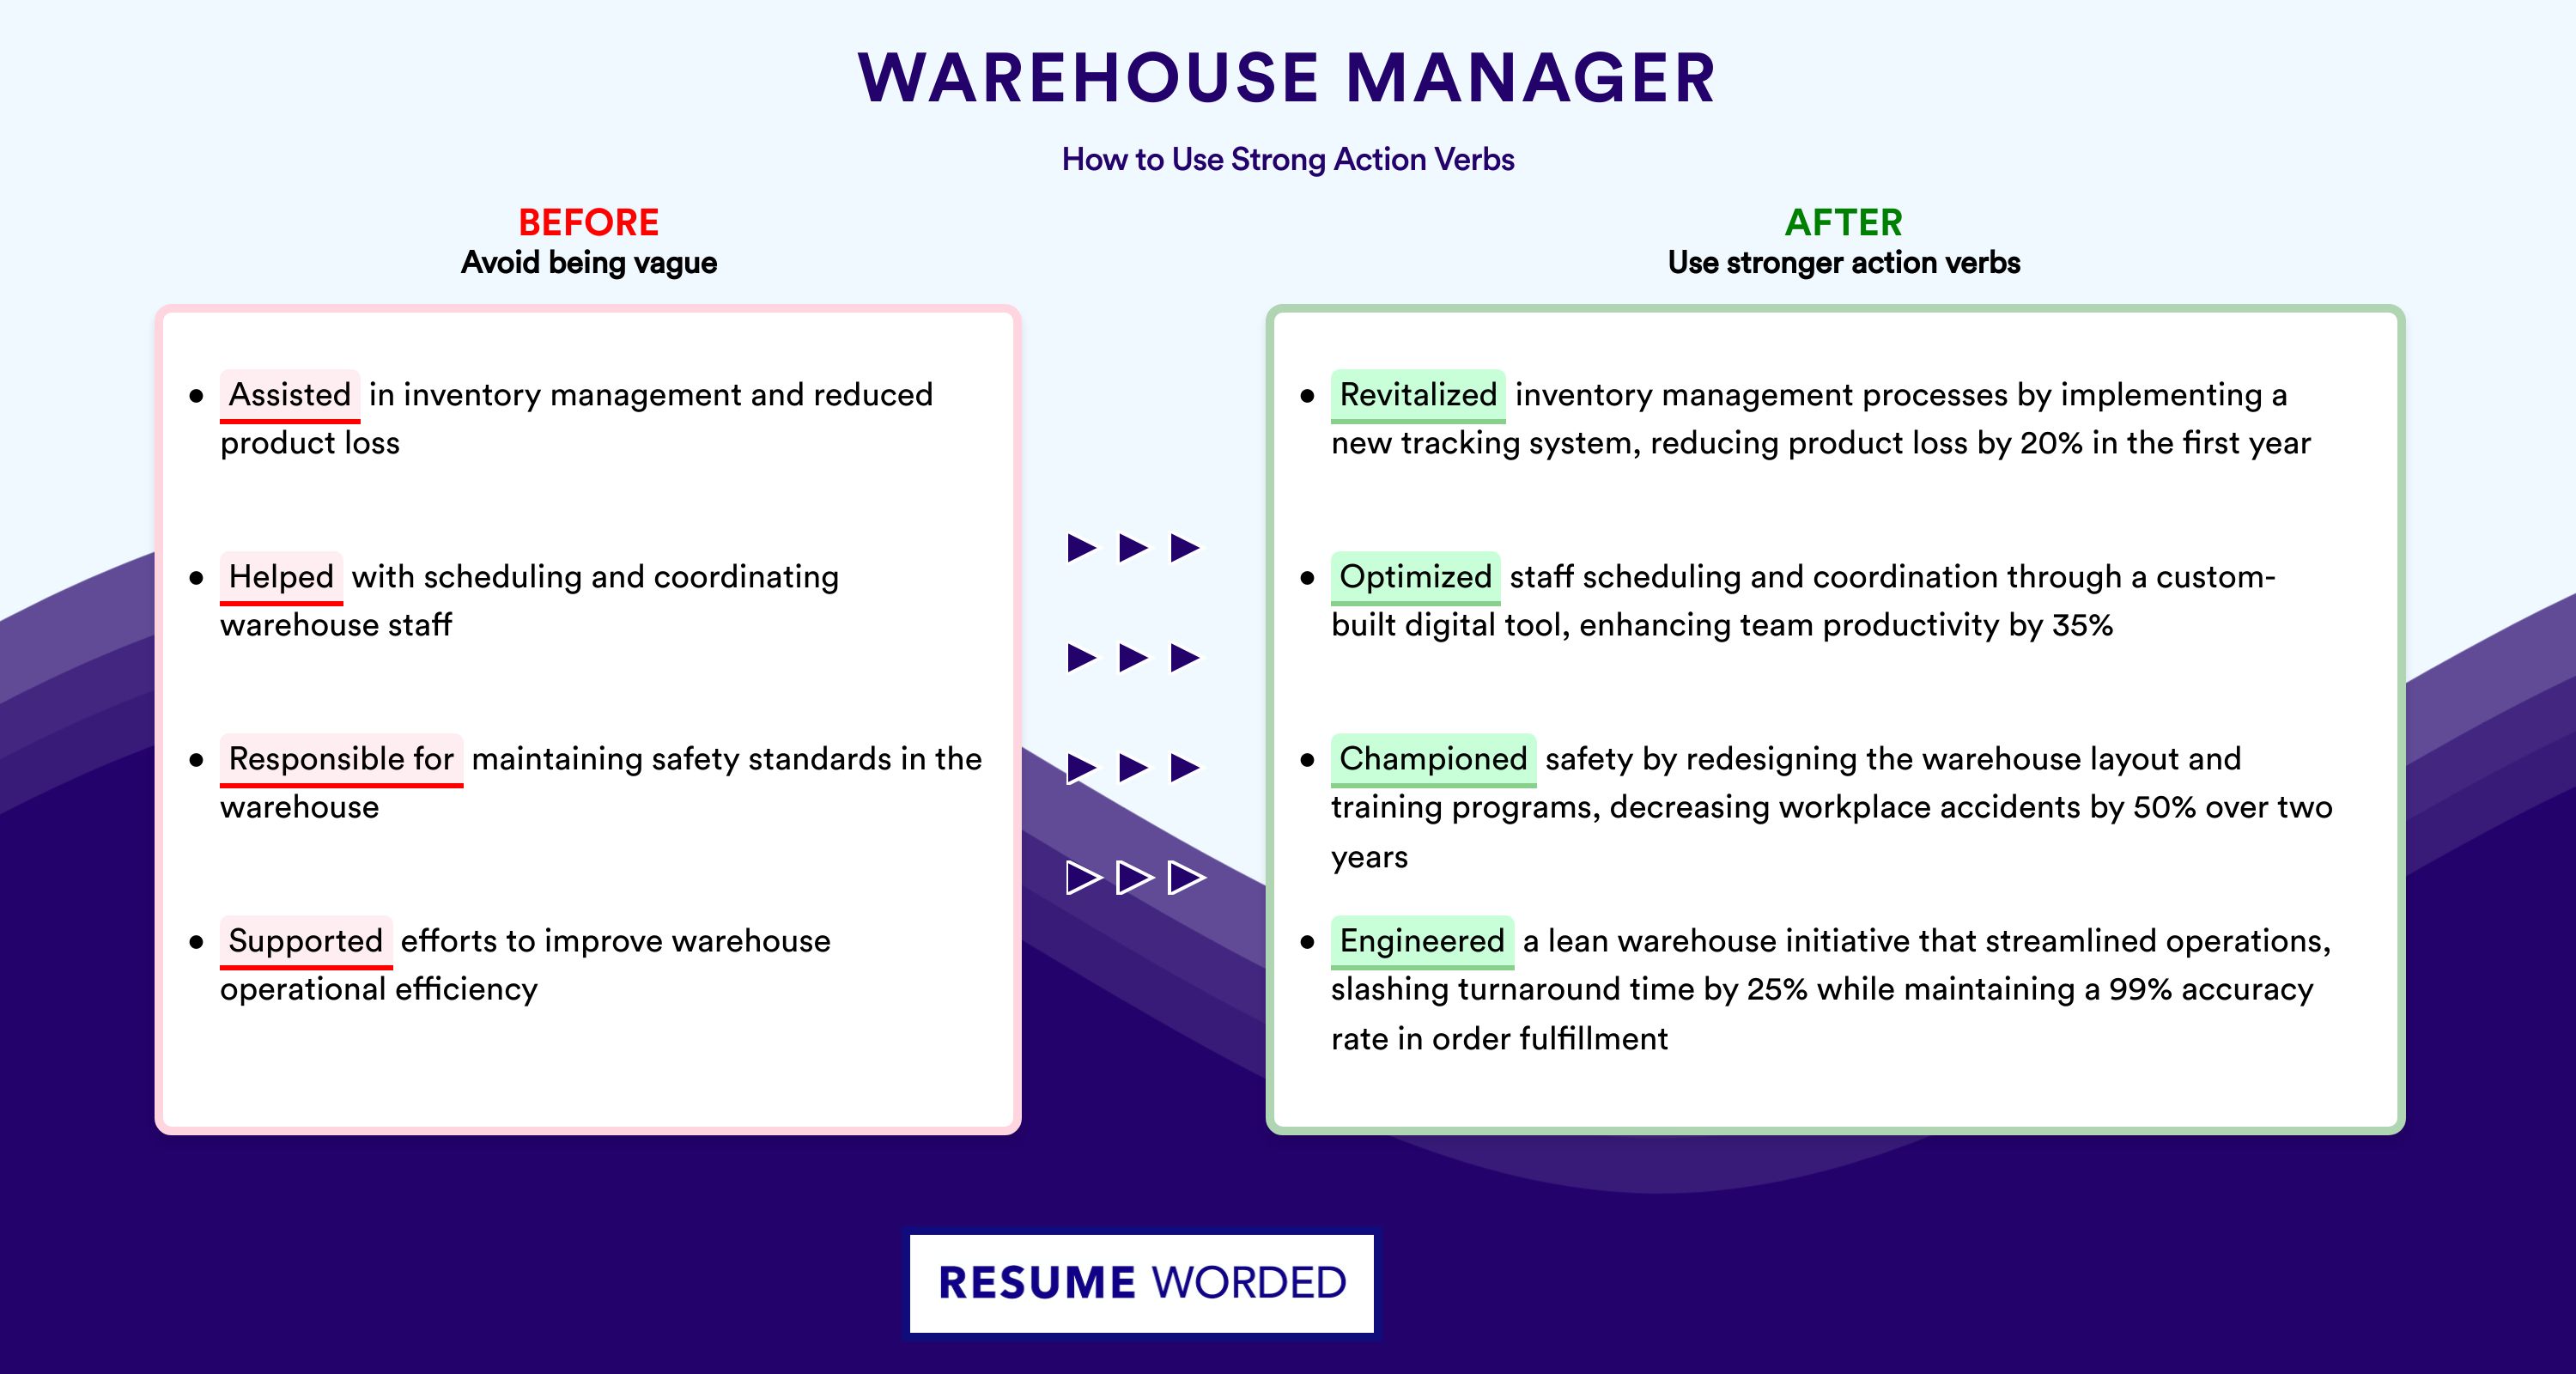 Action Verbs for Warehouse Manager